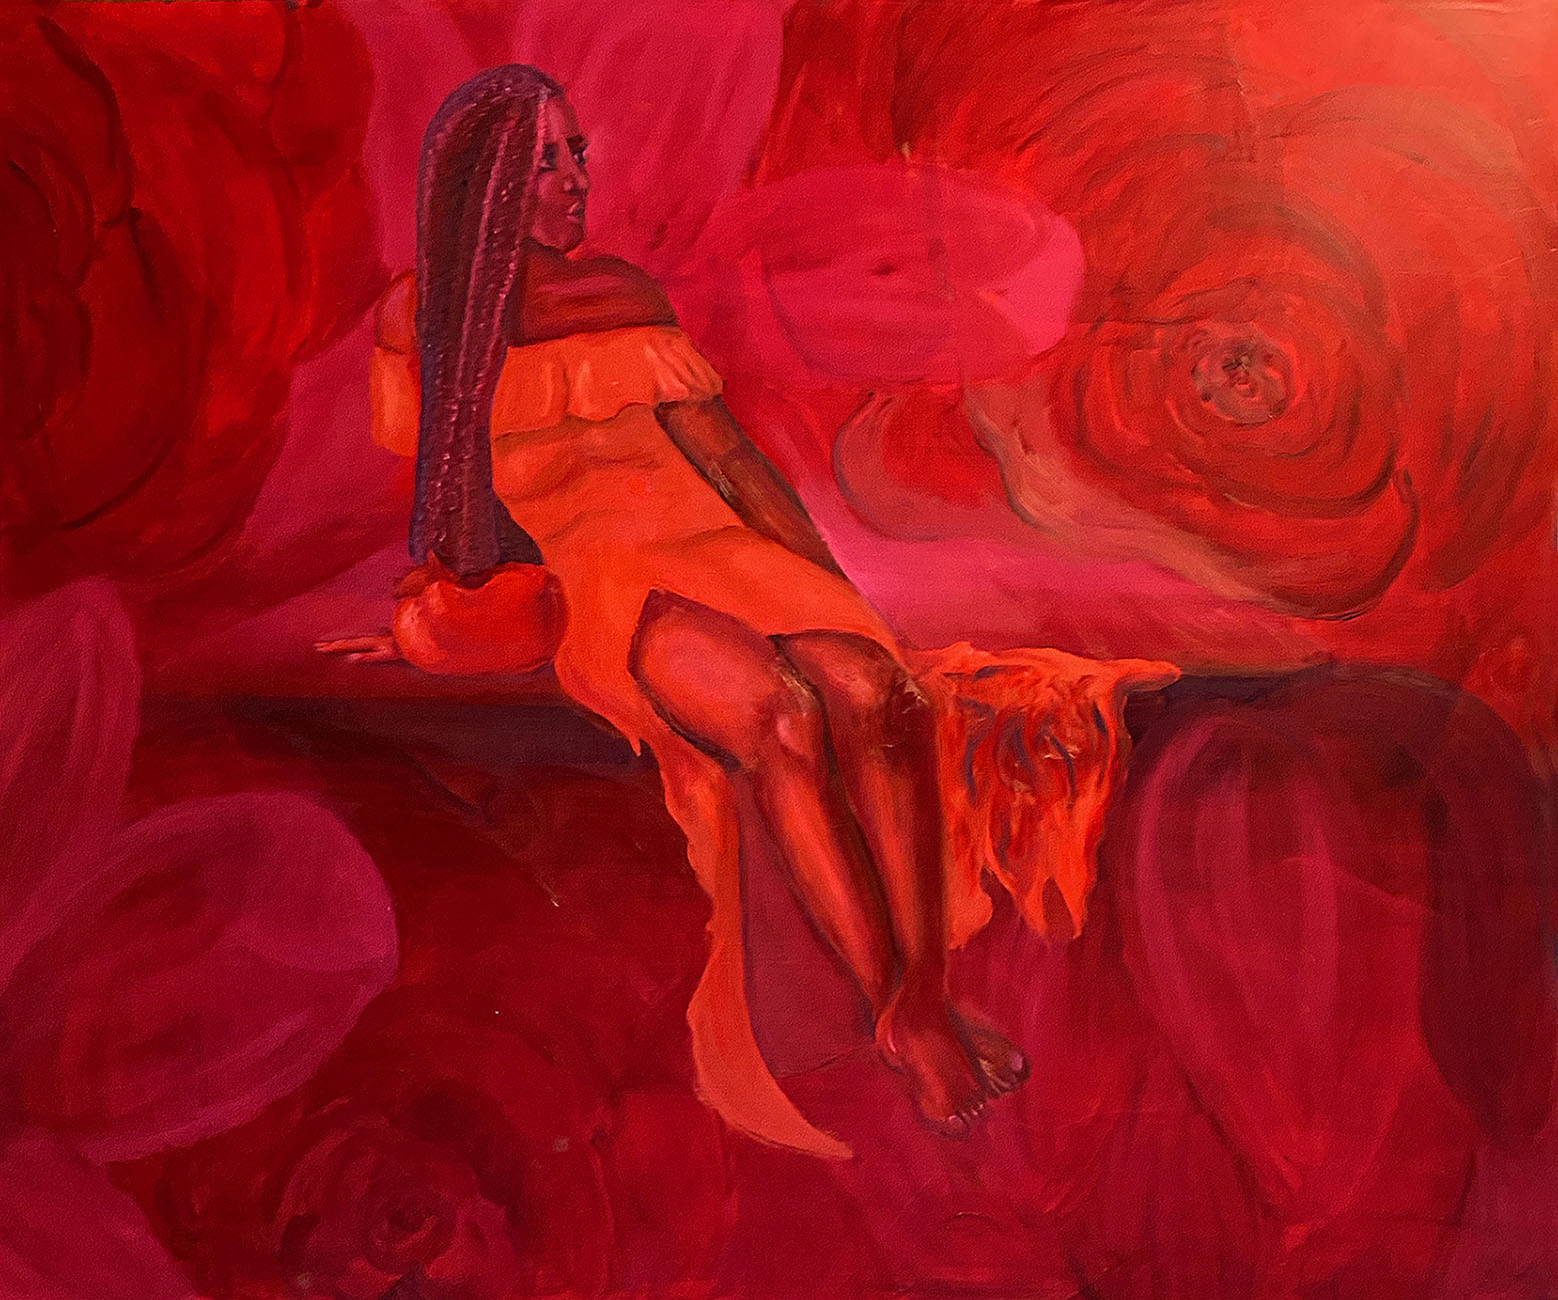 Passionate floral swirls of warmth surrounds a beautiful famine figure sitting on a ledge leaning to the left and looking towards the right. She has a small cat that sits at her left side is curled up into her long flowing braids. She is wearing a beautiful off the shoulder flowing dress that drapes over the side of the ledge and has a fiery warmth to it.